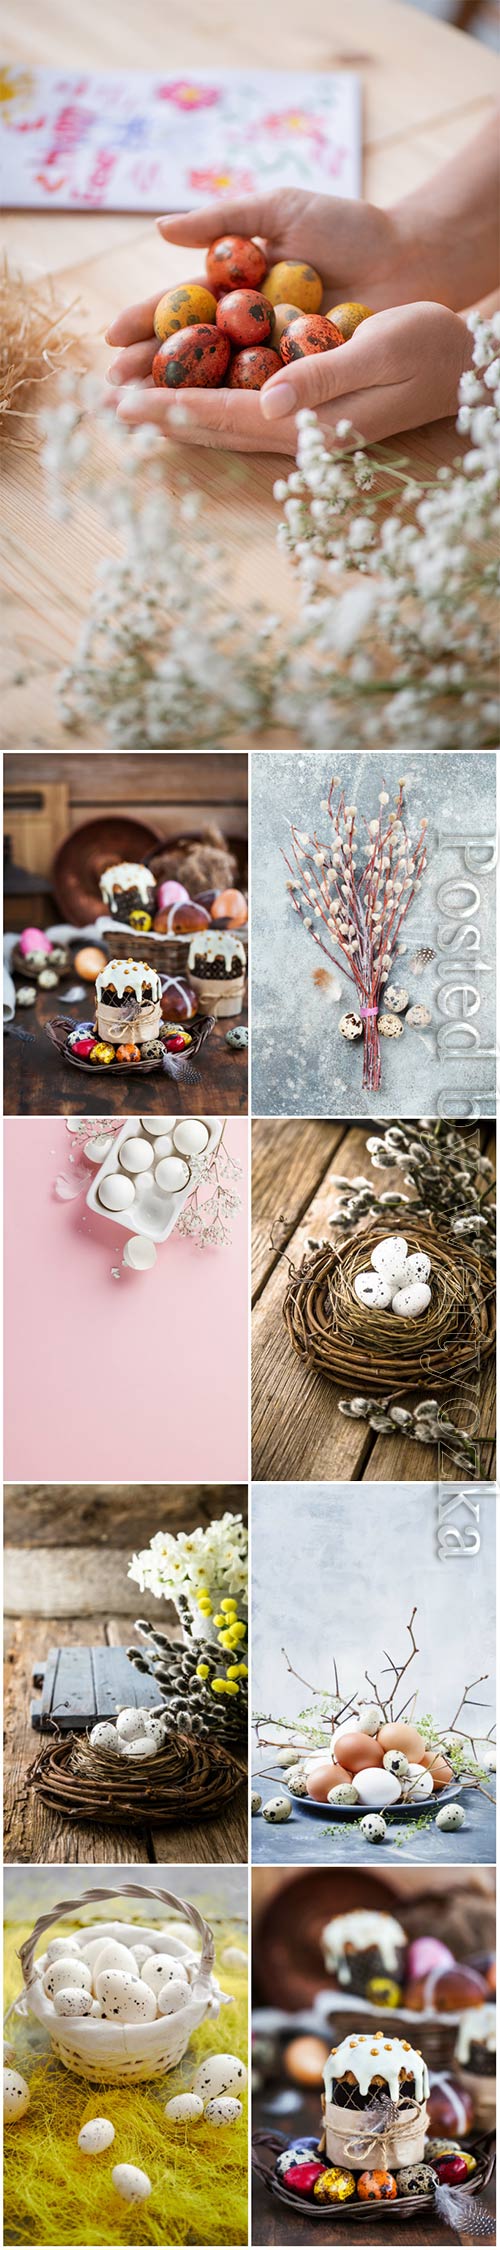 Happy Easter stock photo, Easter eggs, spring flowers # 12